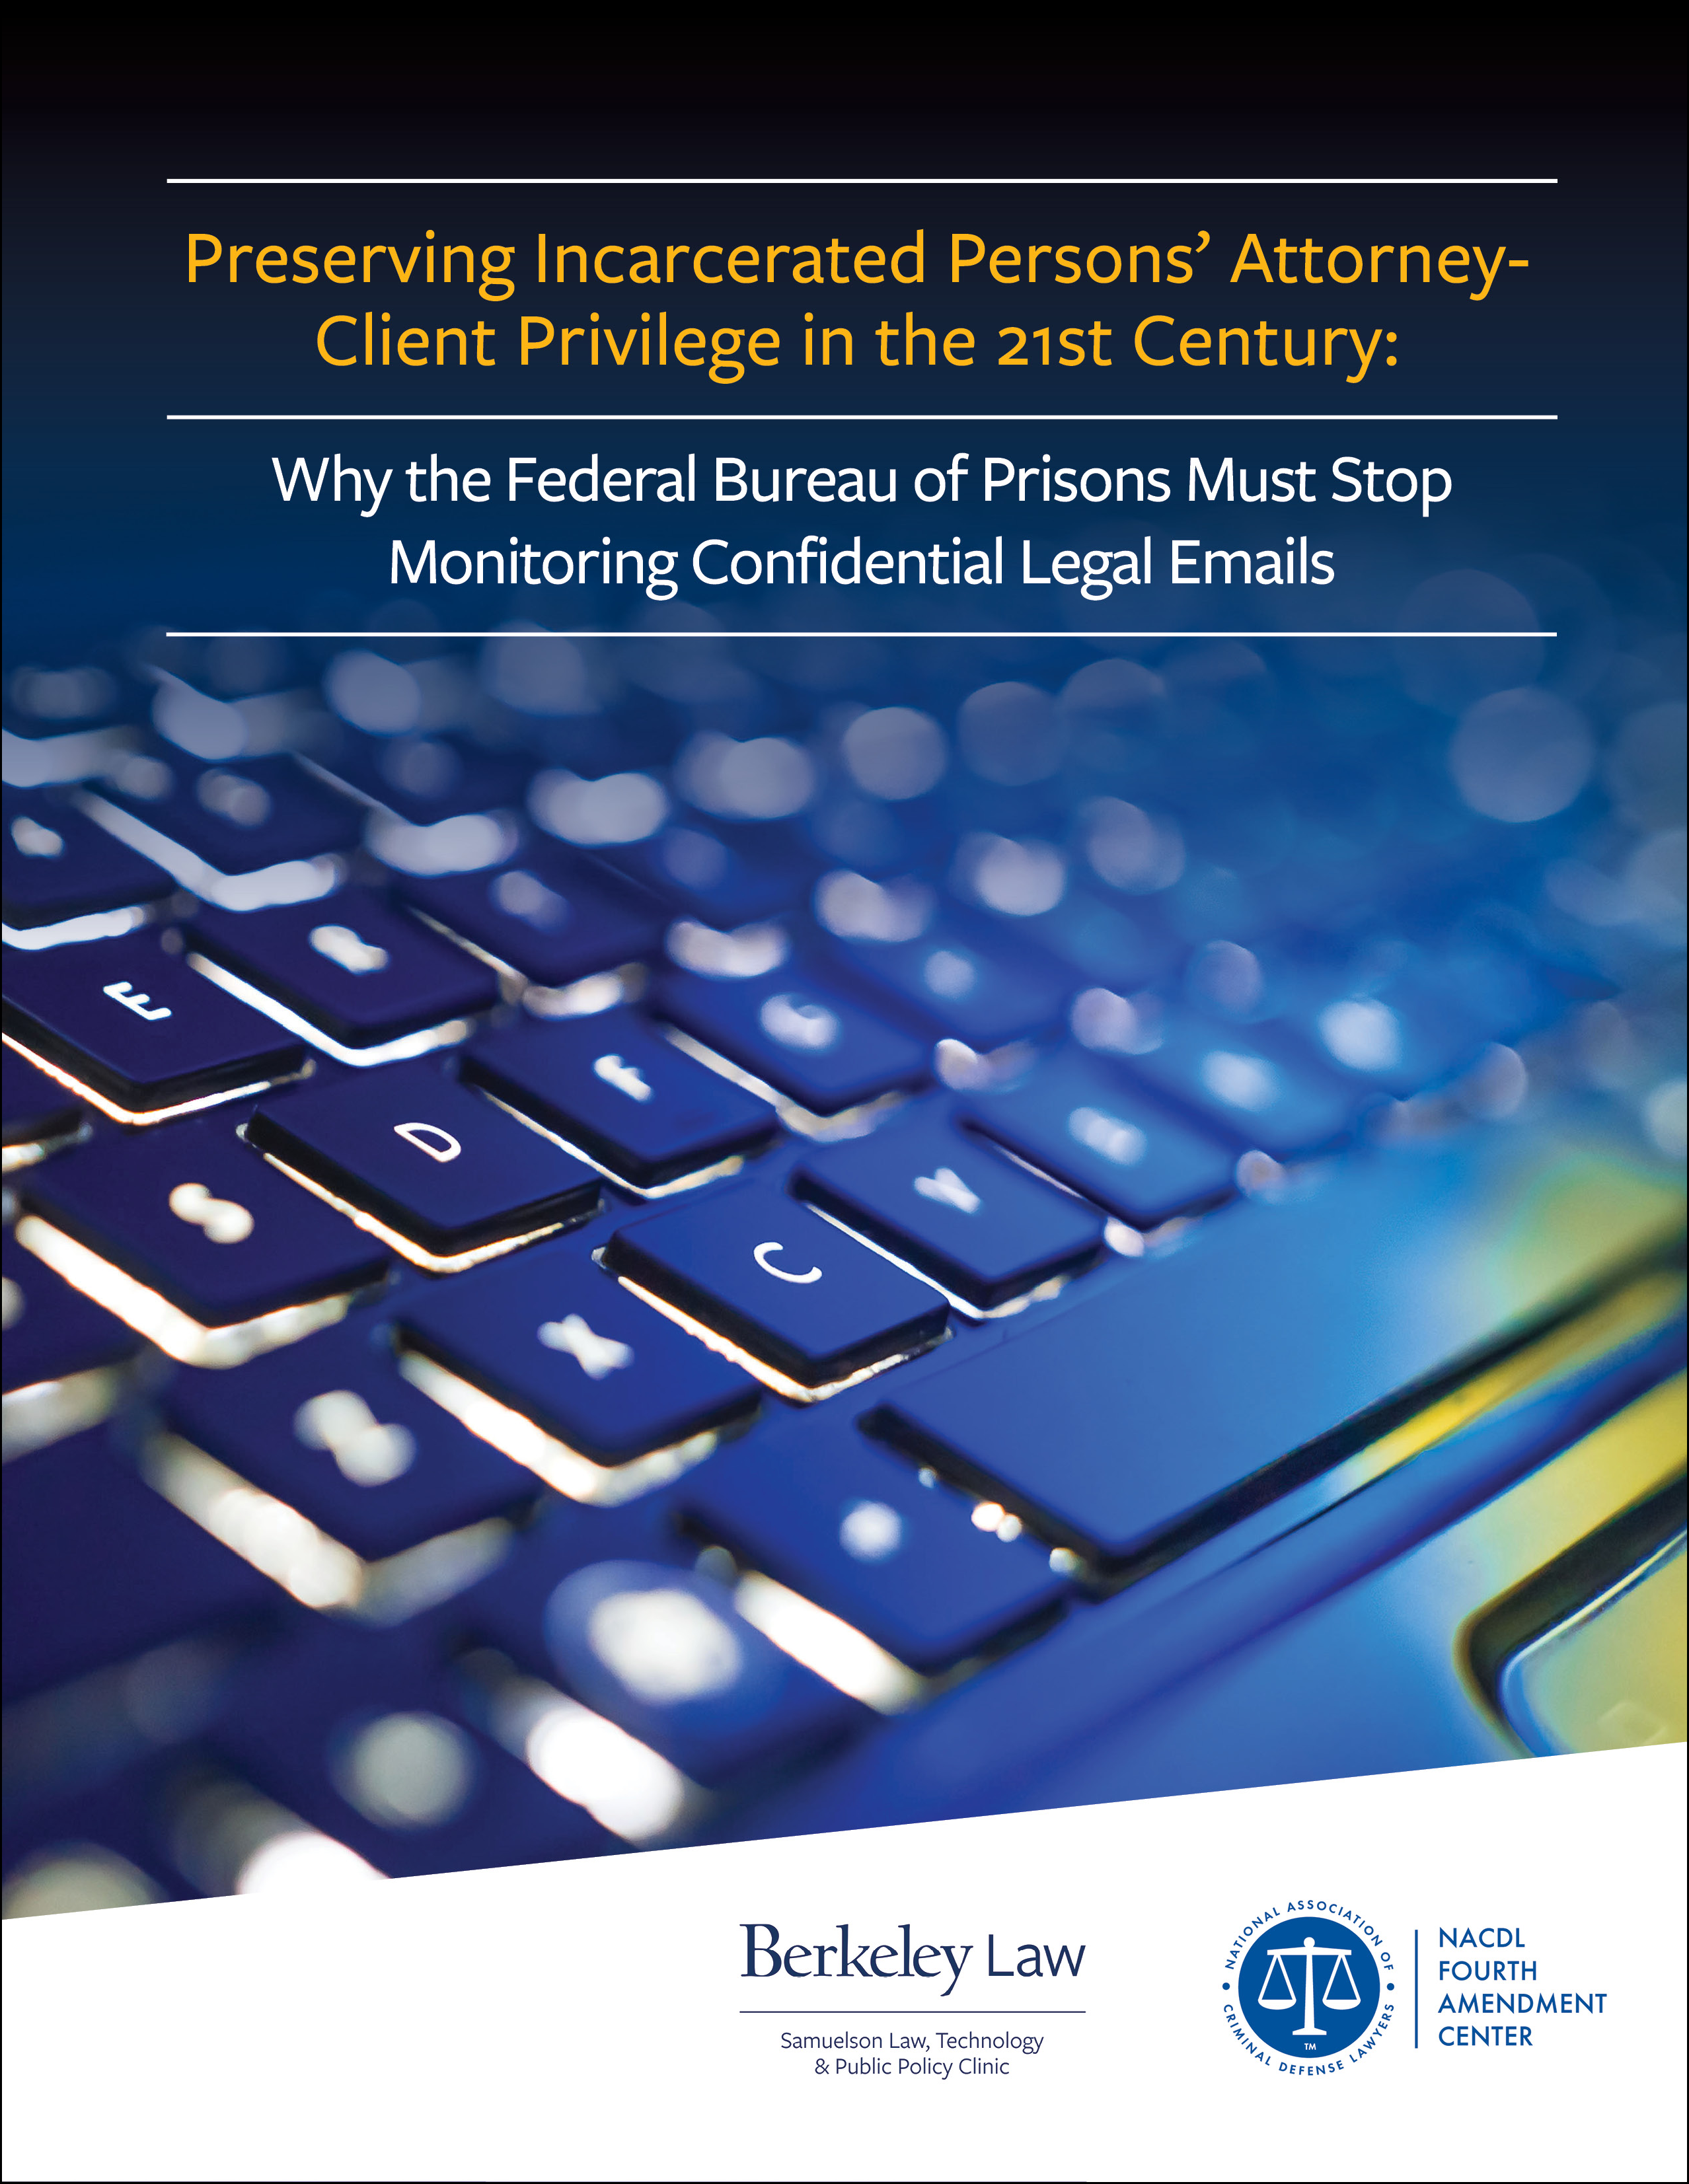 Cover for NACDL report Preserving Incarcerated Persons’ Attorney-Client Privilege in the 21st Century: Why the Federal Bureau of Prisons Must Stop Monitoring Confidential Legal Emails